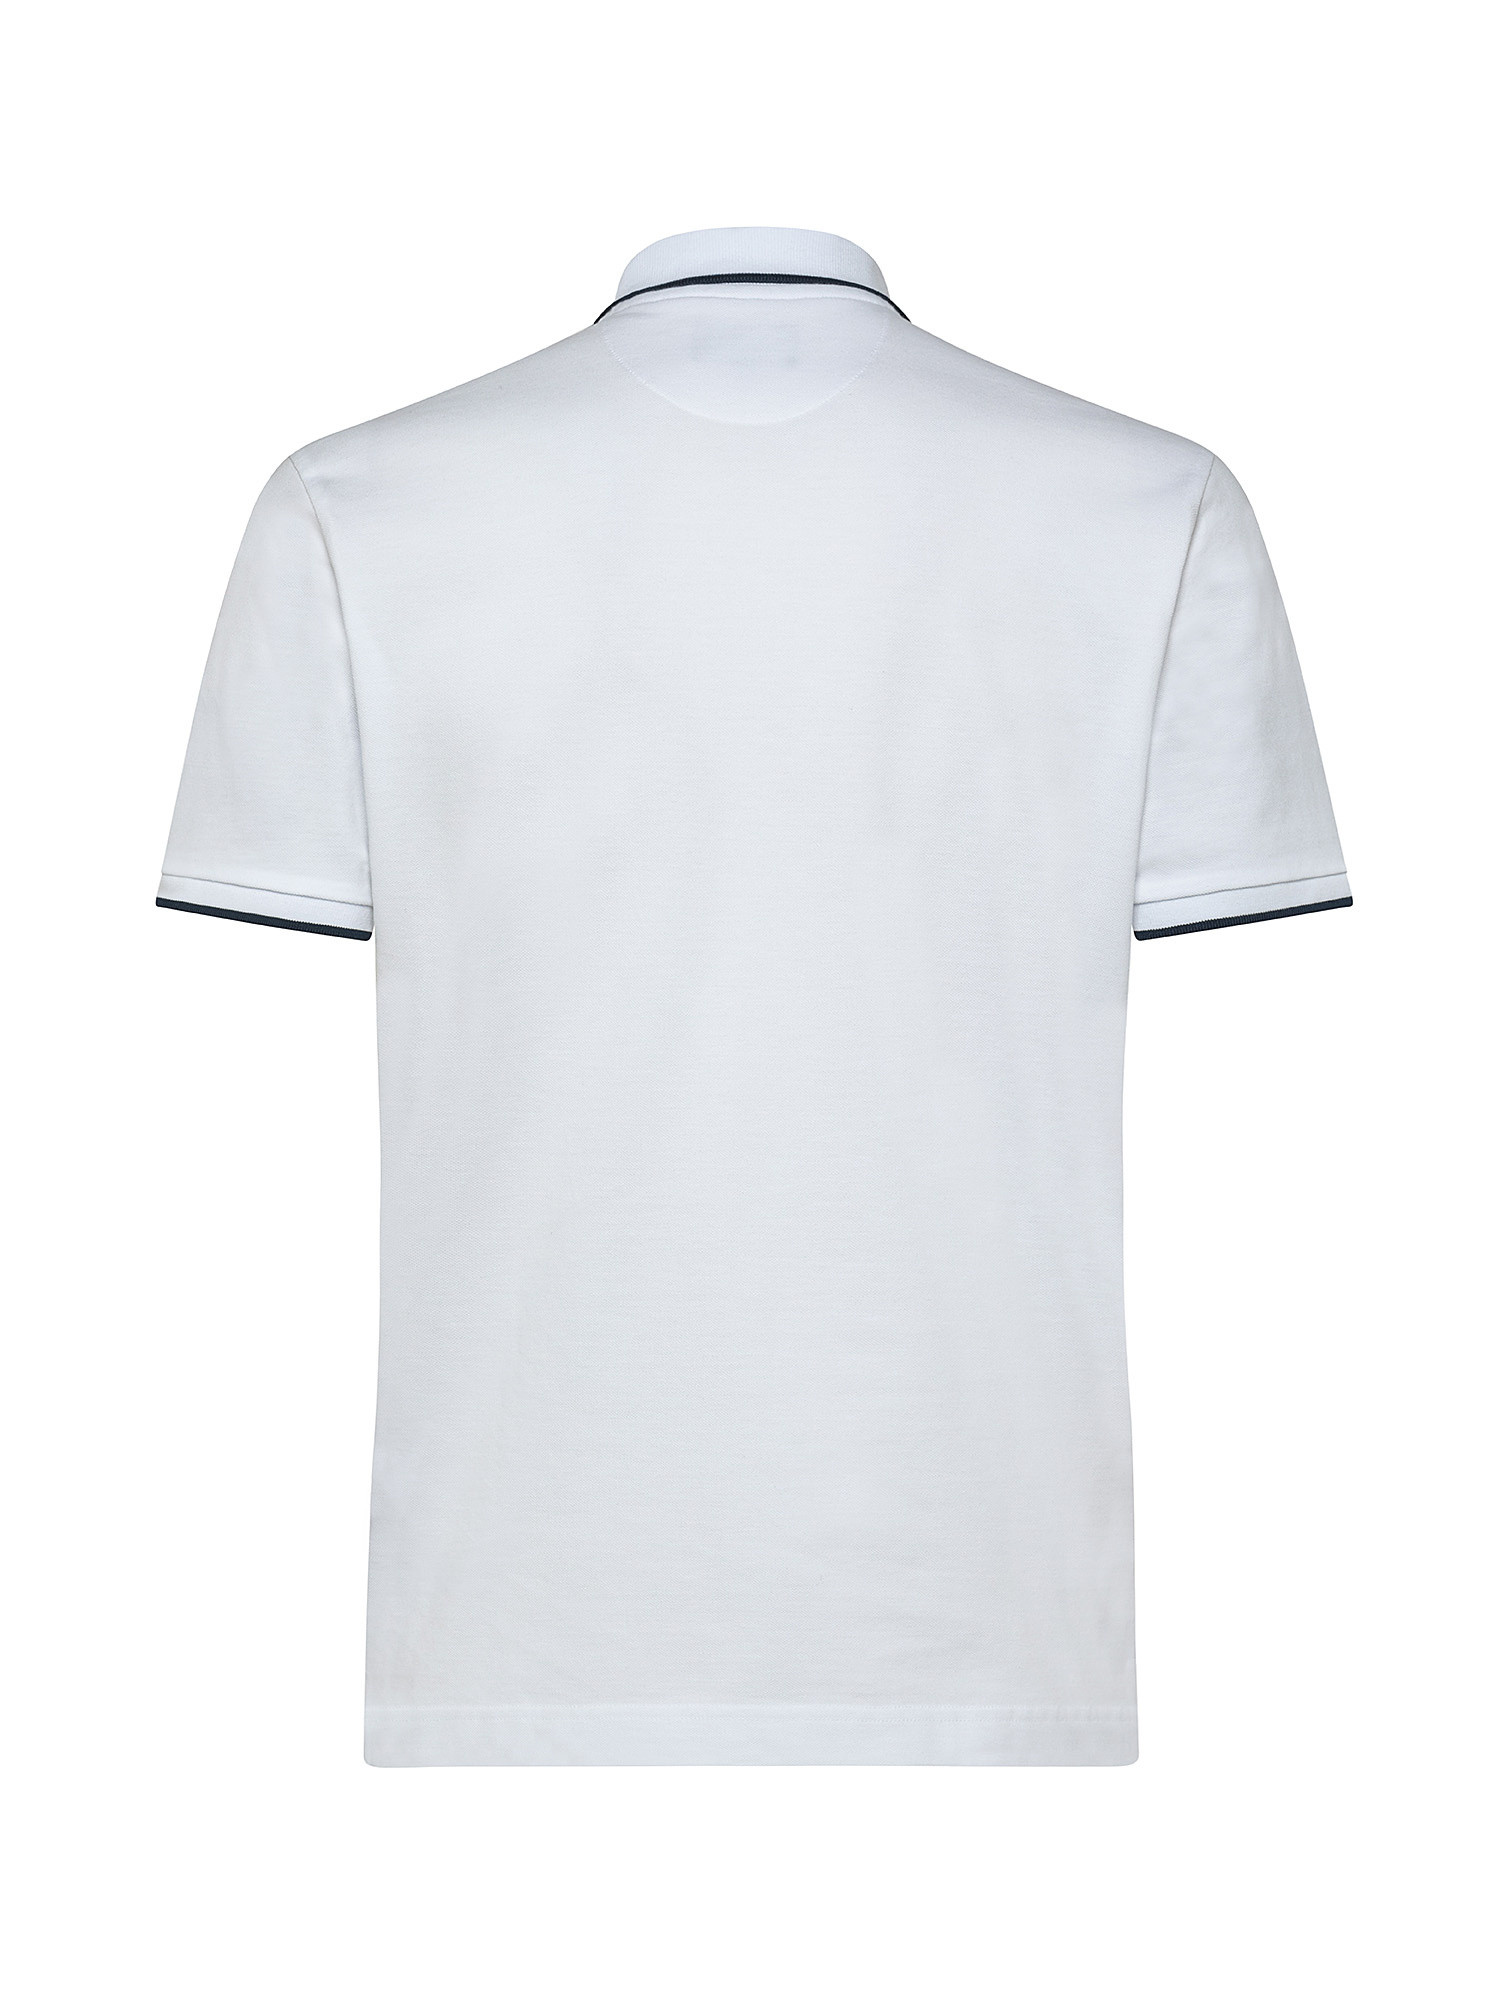 Regular-fit classic piqué polo shirt, White, large image number 1